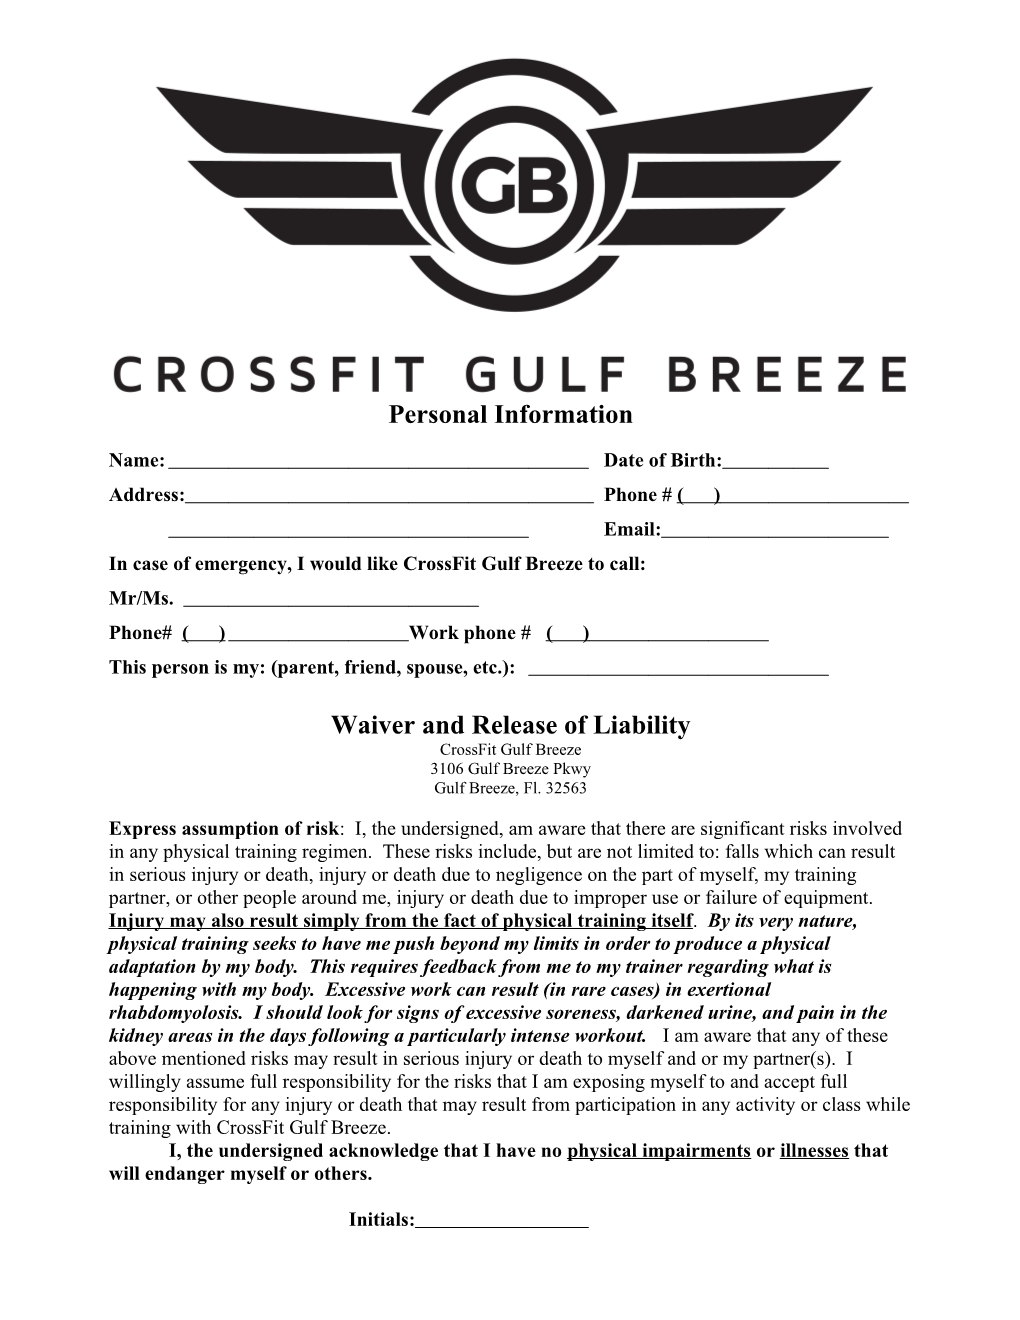 In Case of Emergency, I Would Like Crossfit Gulf Breeze to Call